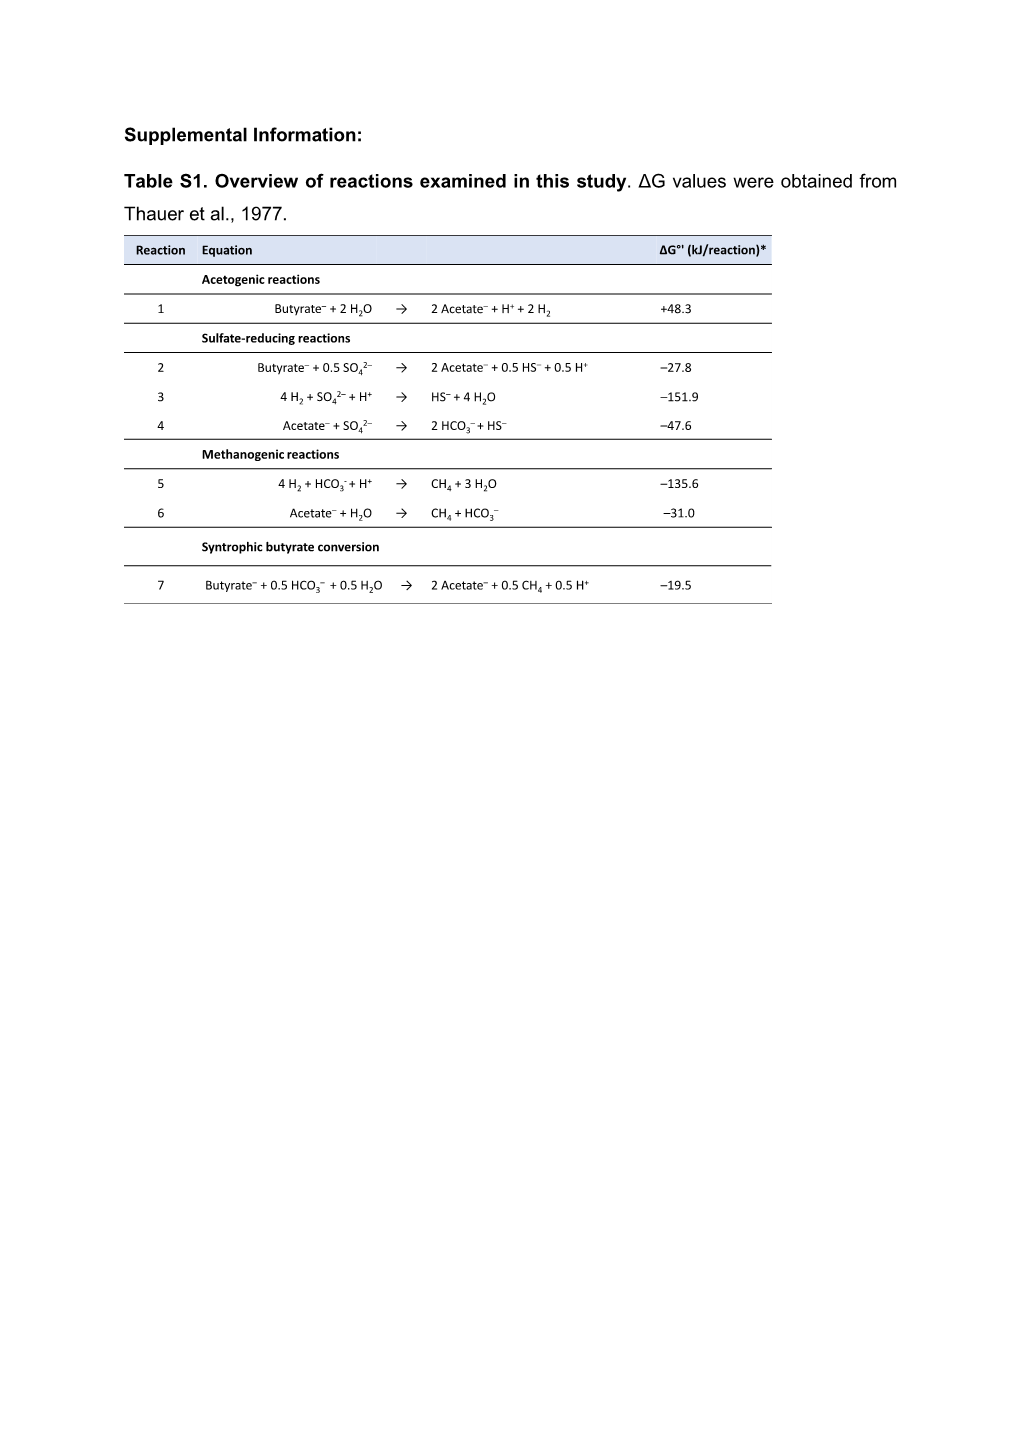 Supplemental Information: Table S1. Overview of Reactions